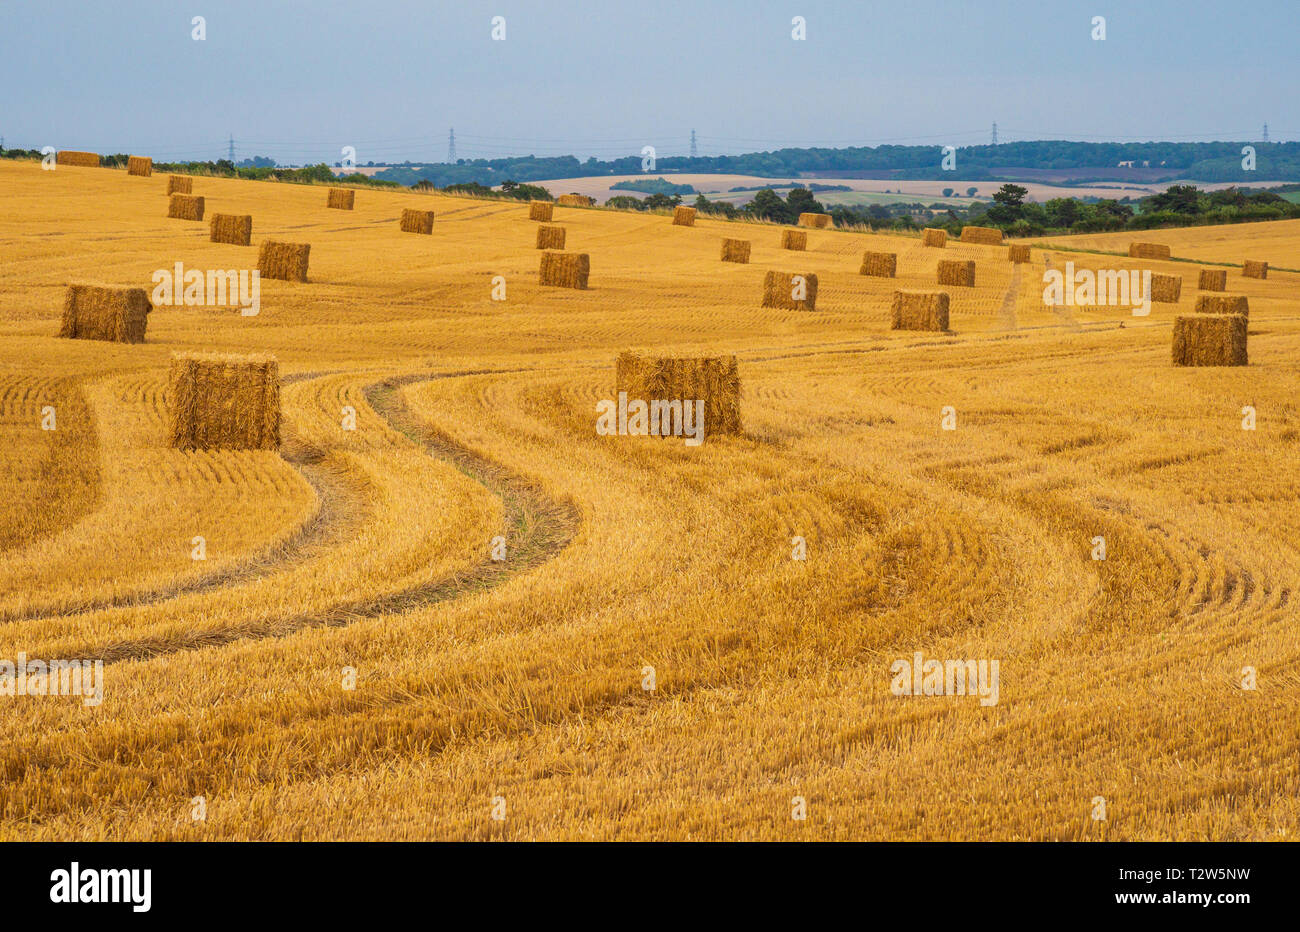 Hay Bales laid out in field after the crops have been harvested Cambridgeshire / Essex border UK Stock Photo